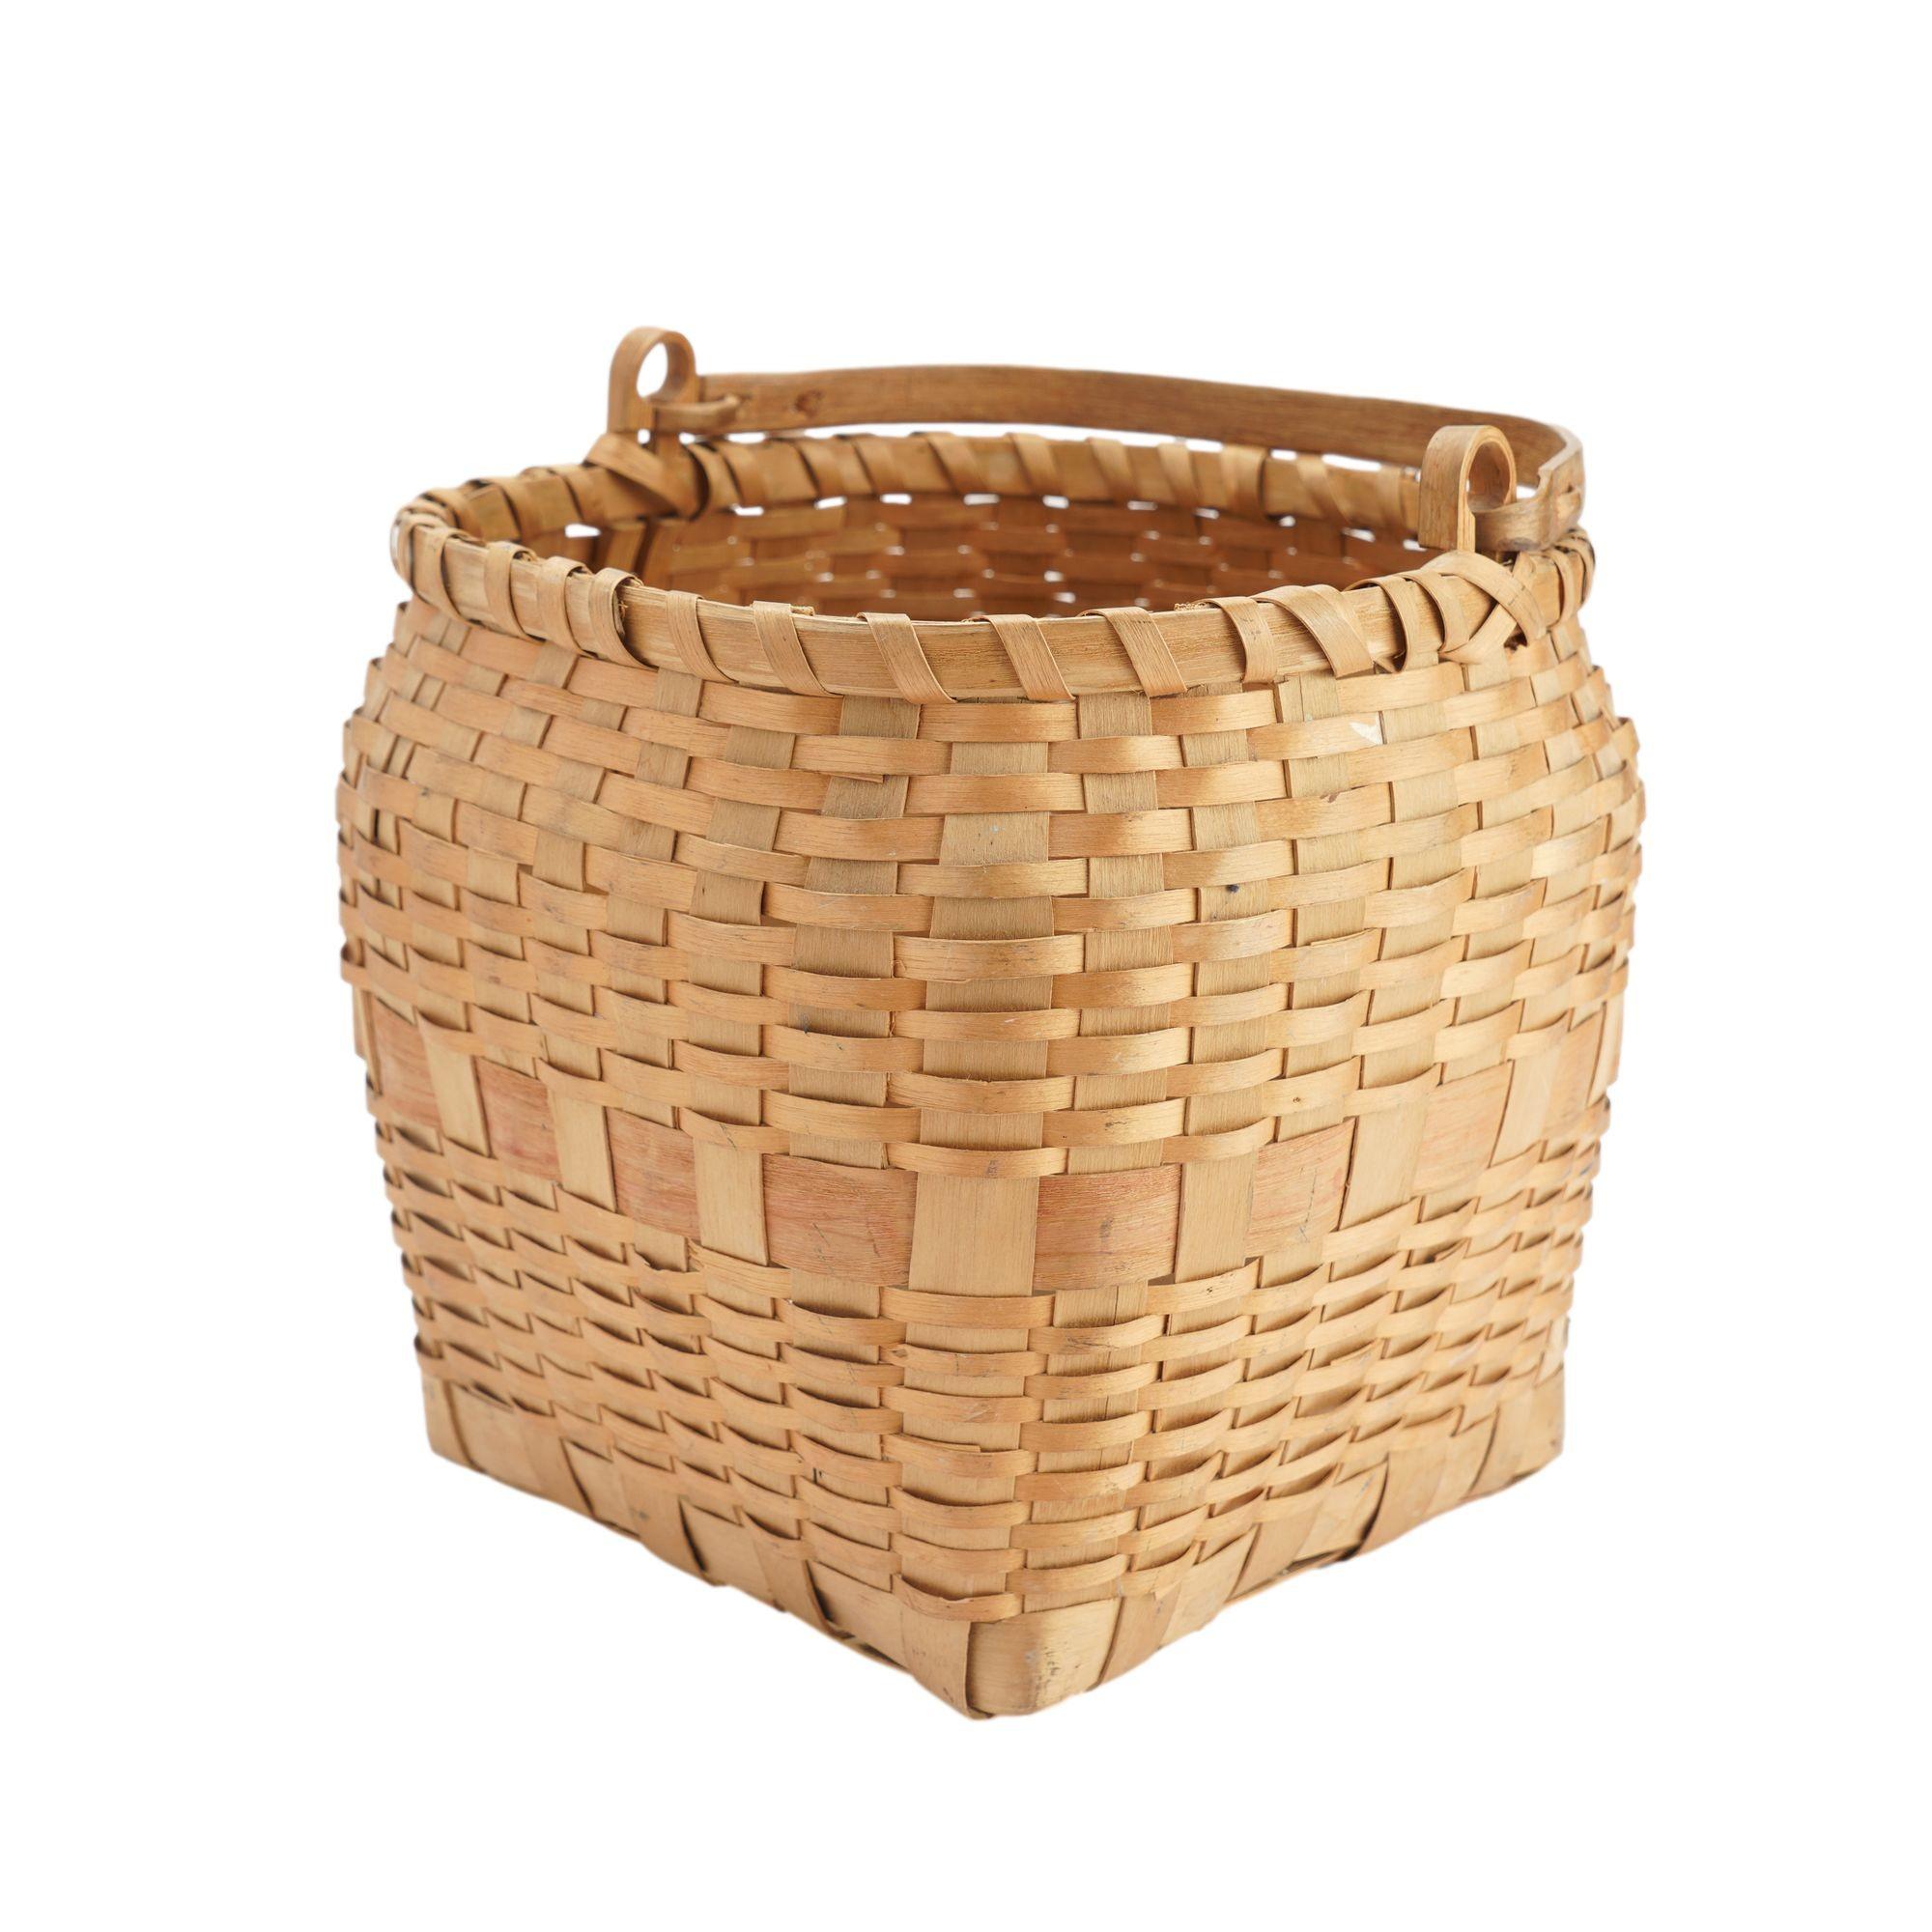 19th century Native American hand woven square based ash basket with a hand carved clothes pin hinged loop handle. The upper rim of the basket is captured by a round double ash spline lashed with 1/4